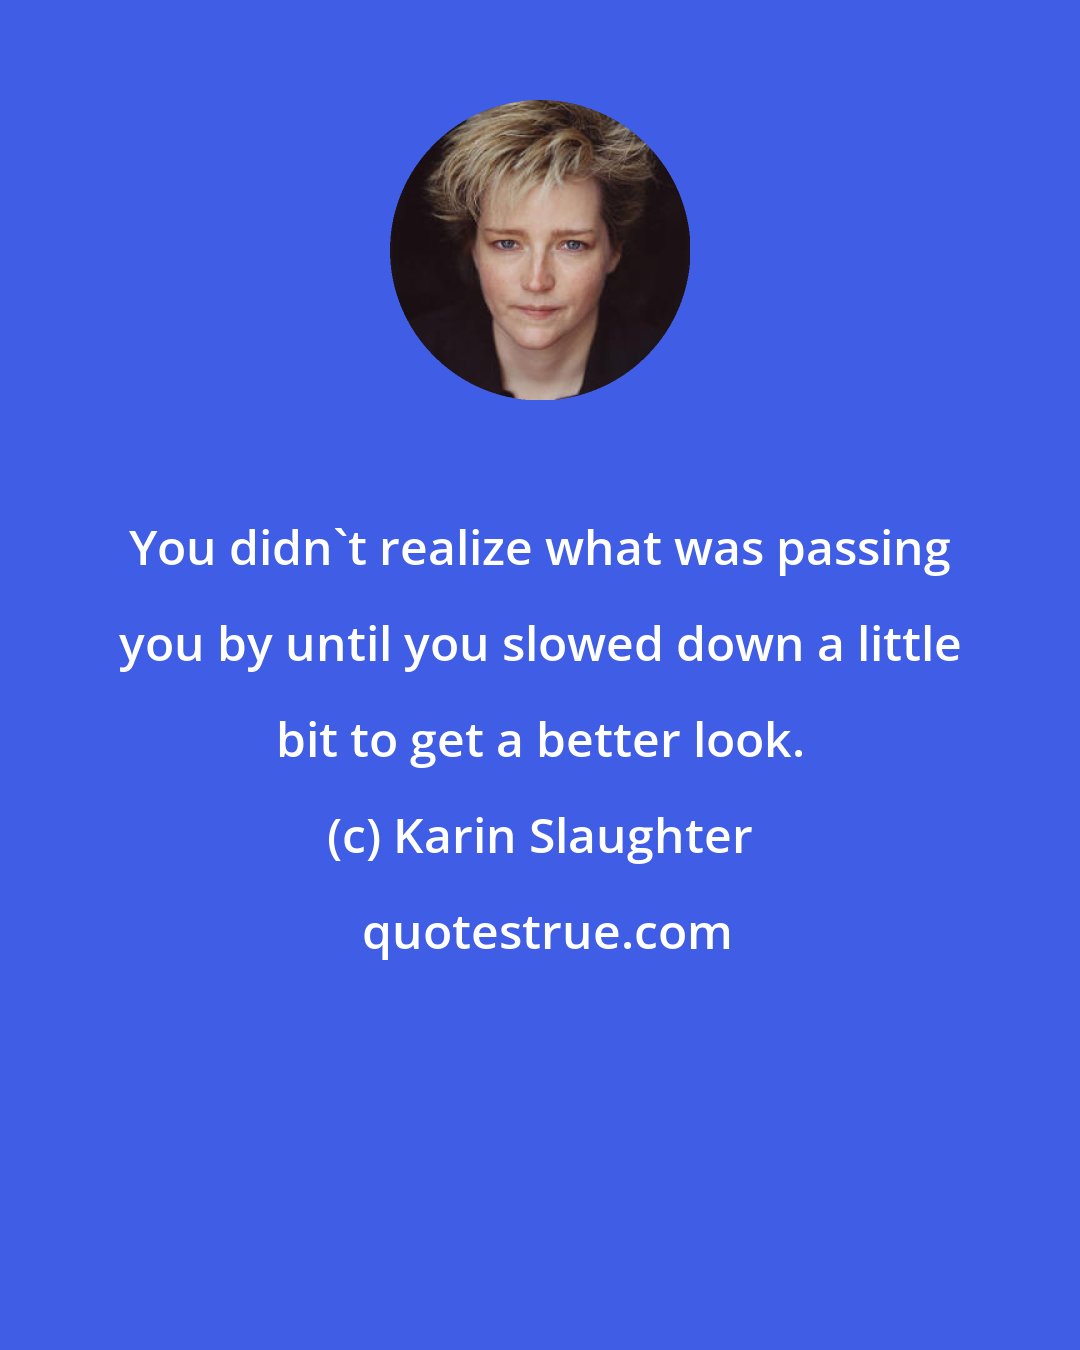 Karin Slaughter: You didn't realize what was passing you by until you slowed down a little bit to get a better look.